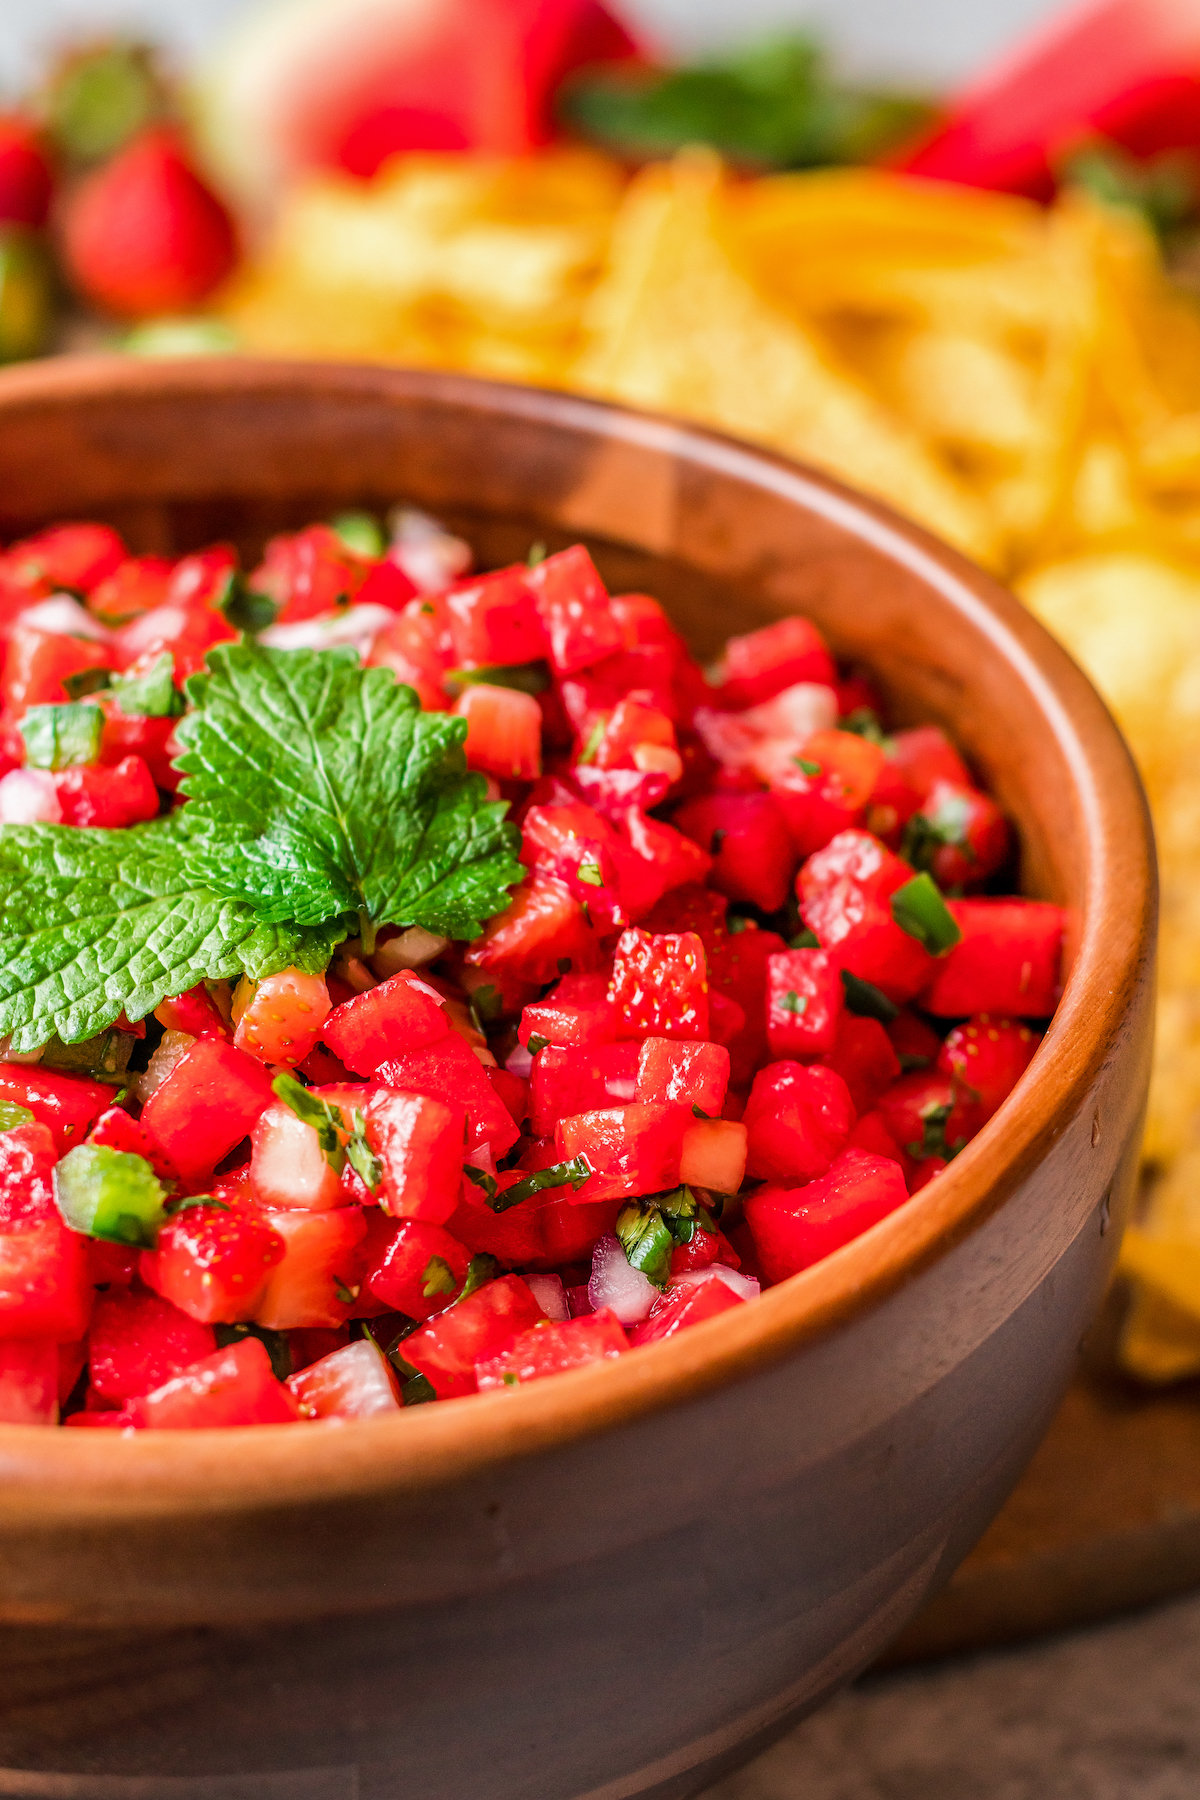 Salsa in a brown bowl, garnished with fresh mint.